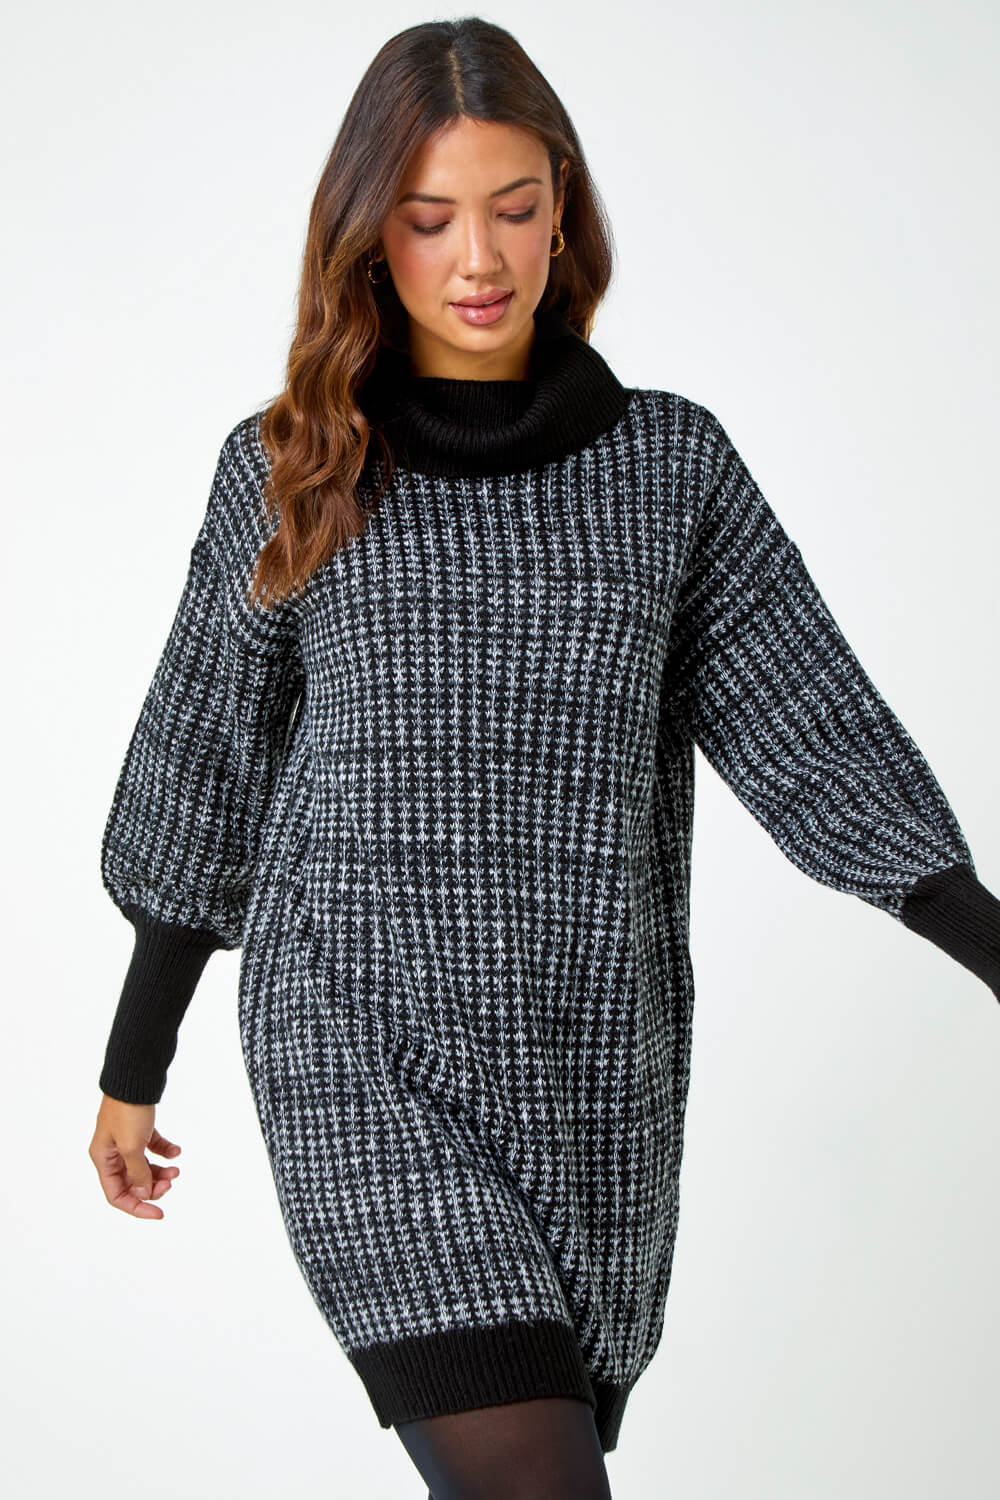 Charcoal Contrast Roll Neck Jumper Dress, Image 1 of 5